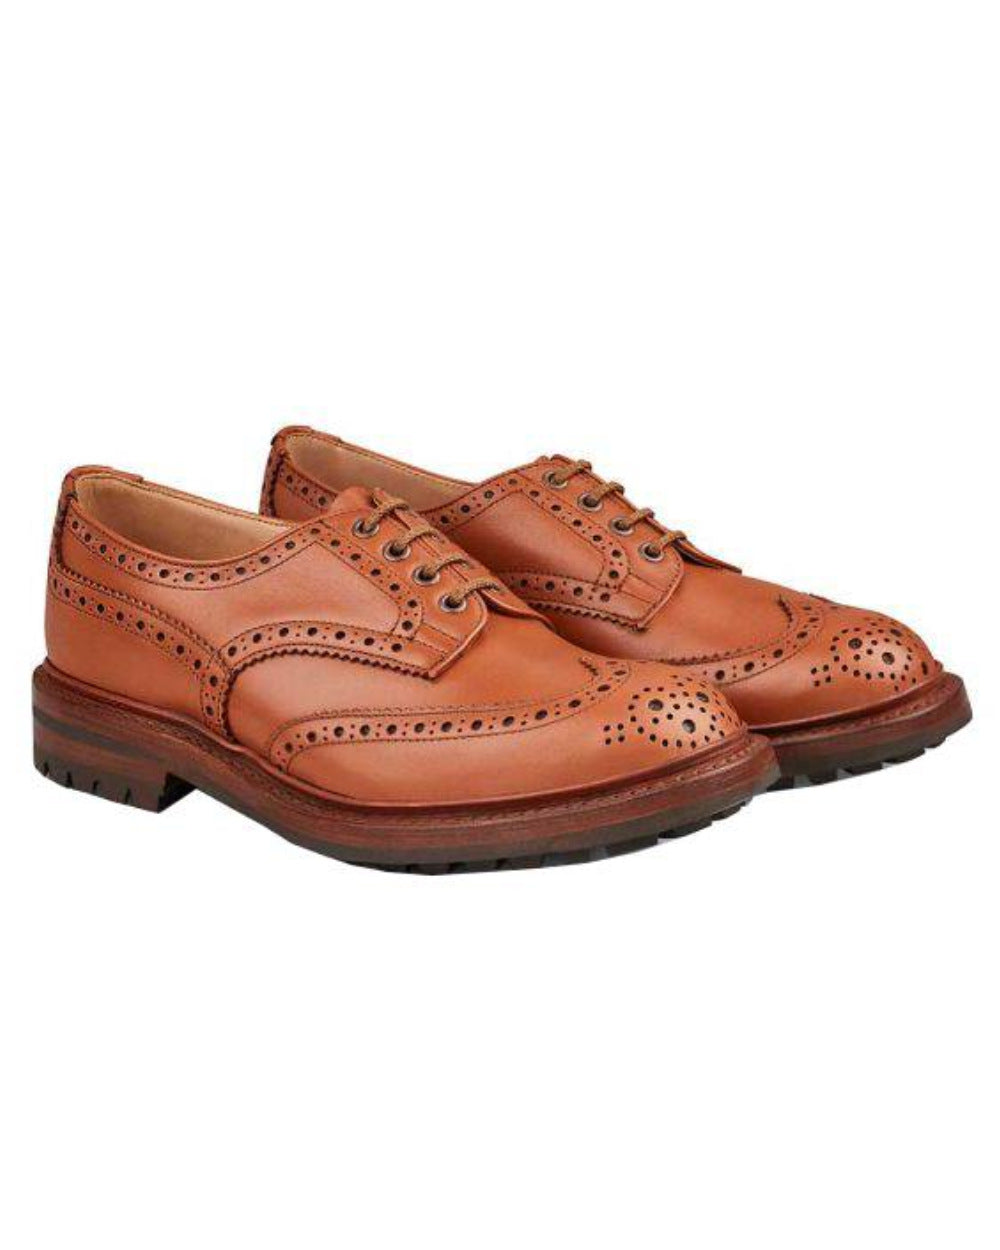 Tan Coloured Trickers Keswick Country Shoe On A White Background 